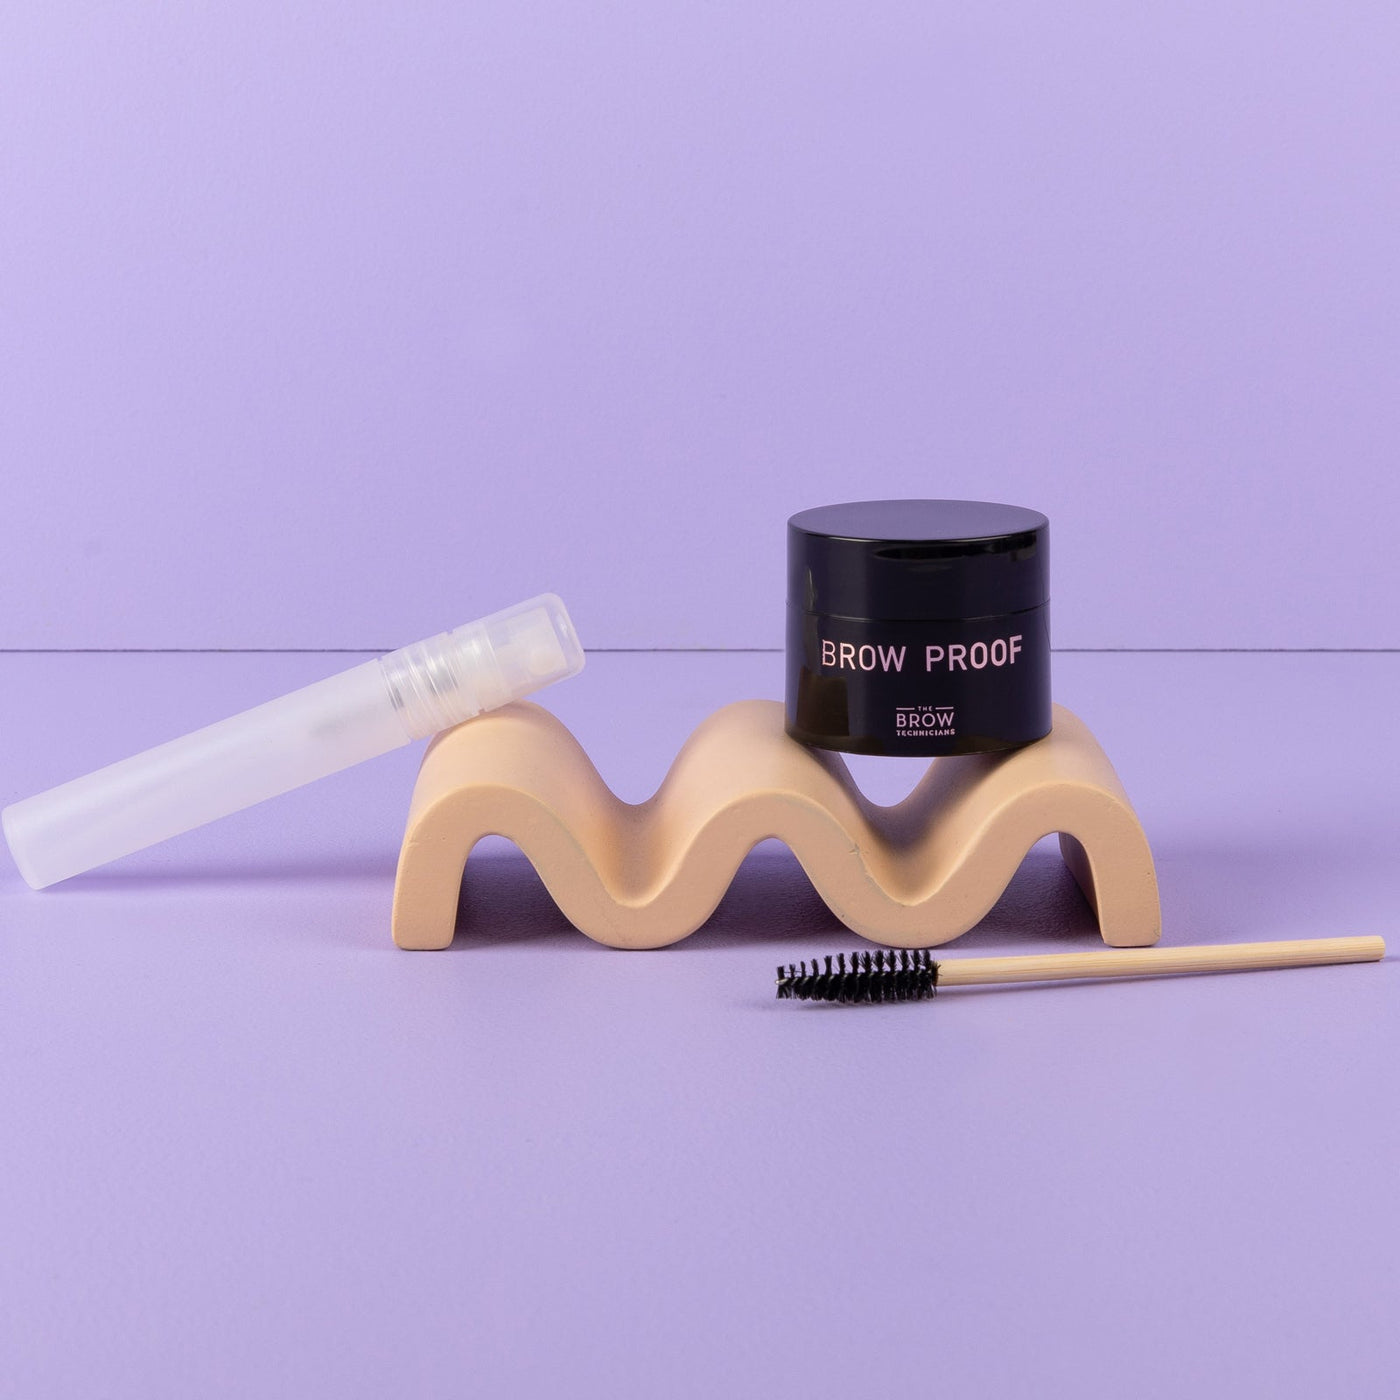 The Brow Technicians Brow Proof Super Hold Clear Brow Glue styled